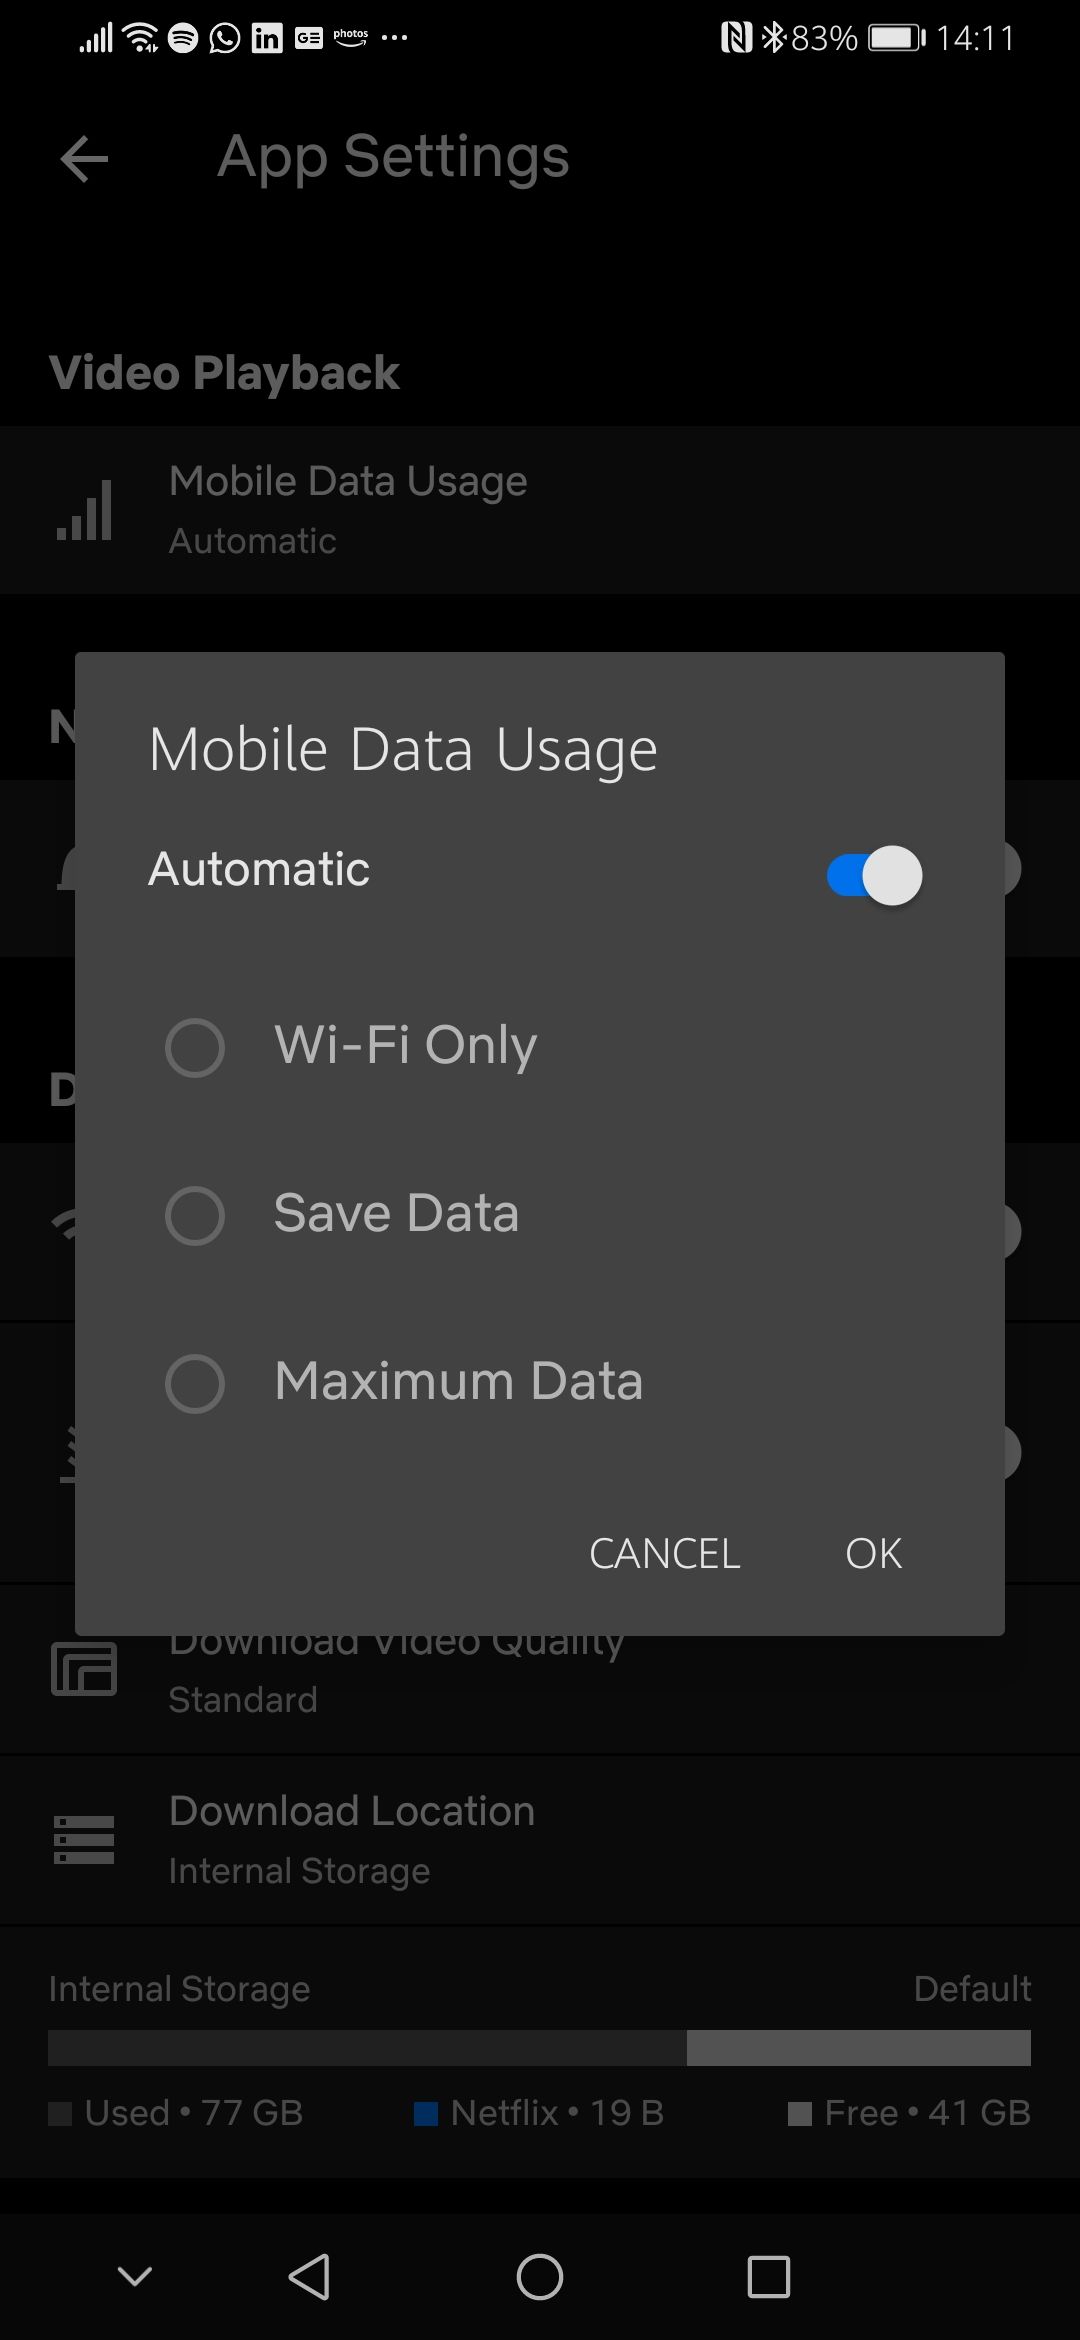 Netflix android app mobile data usage settings